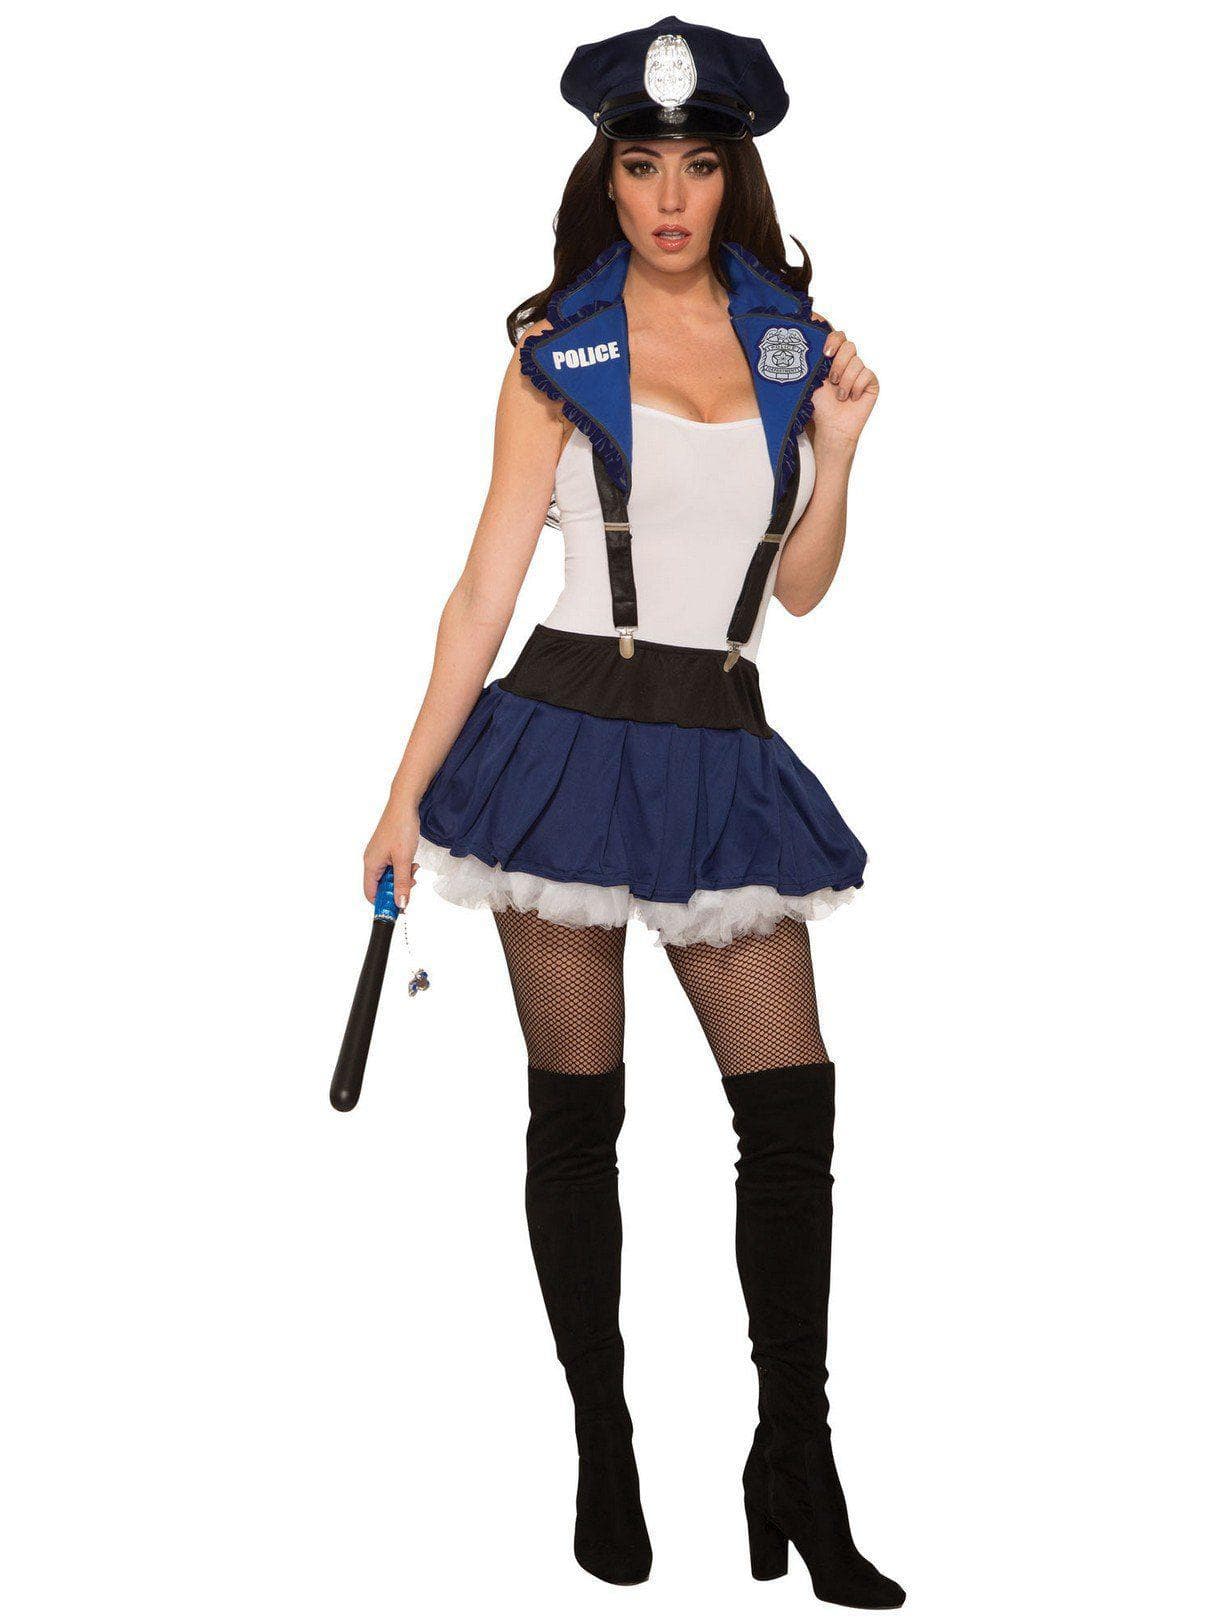 Police Collar And Suspenders - costumes.com